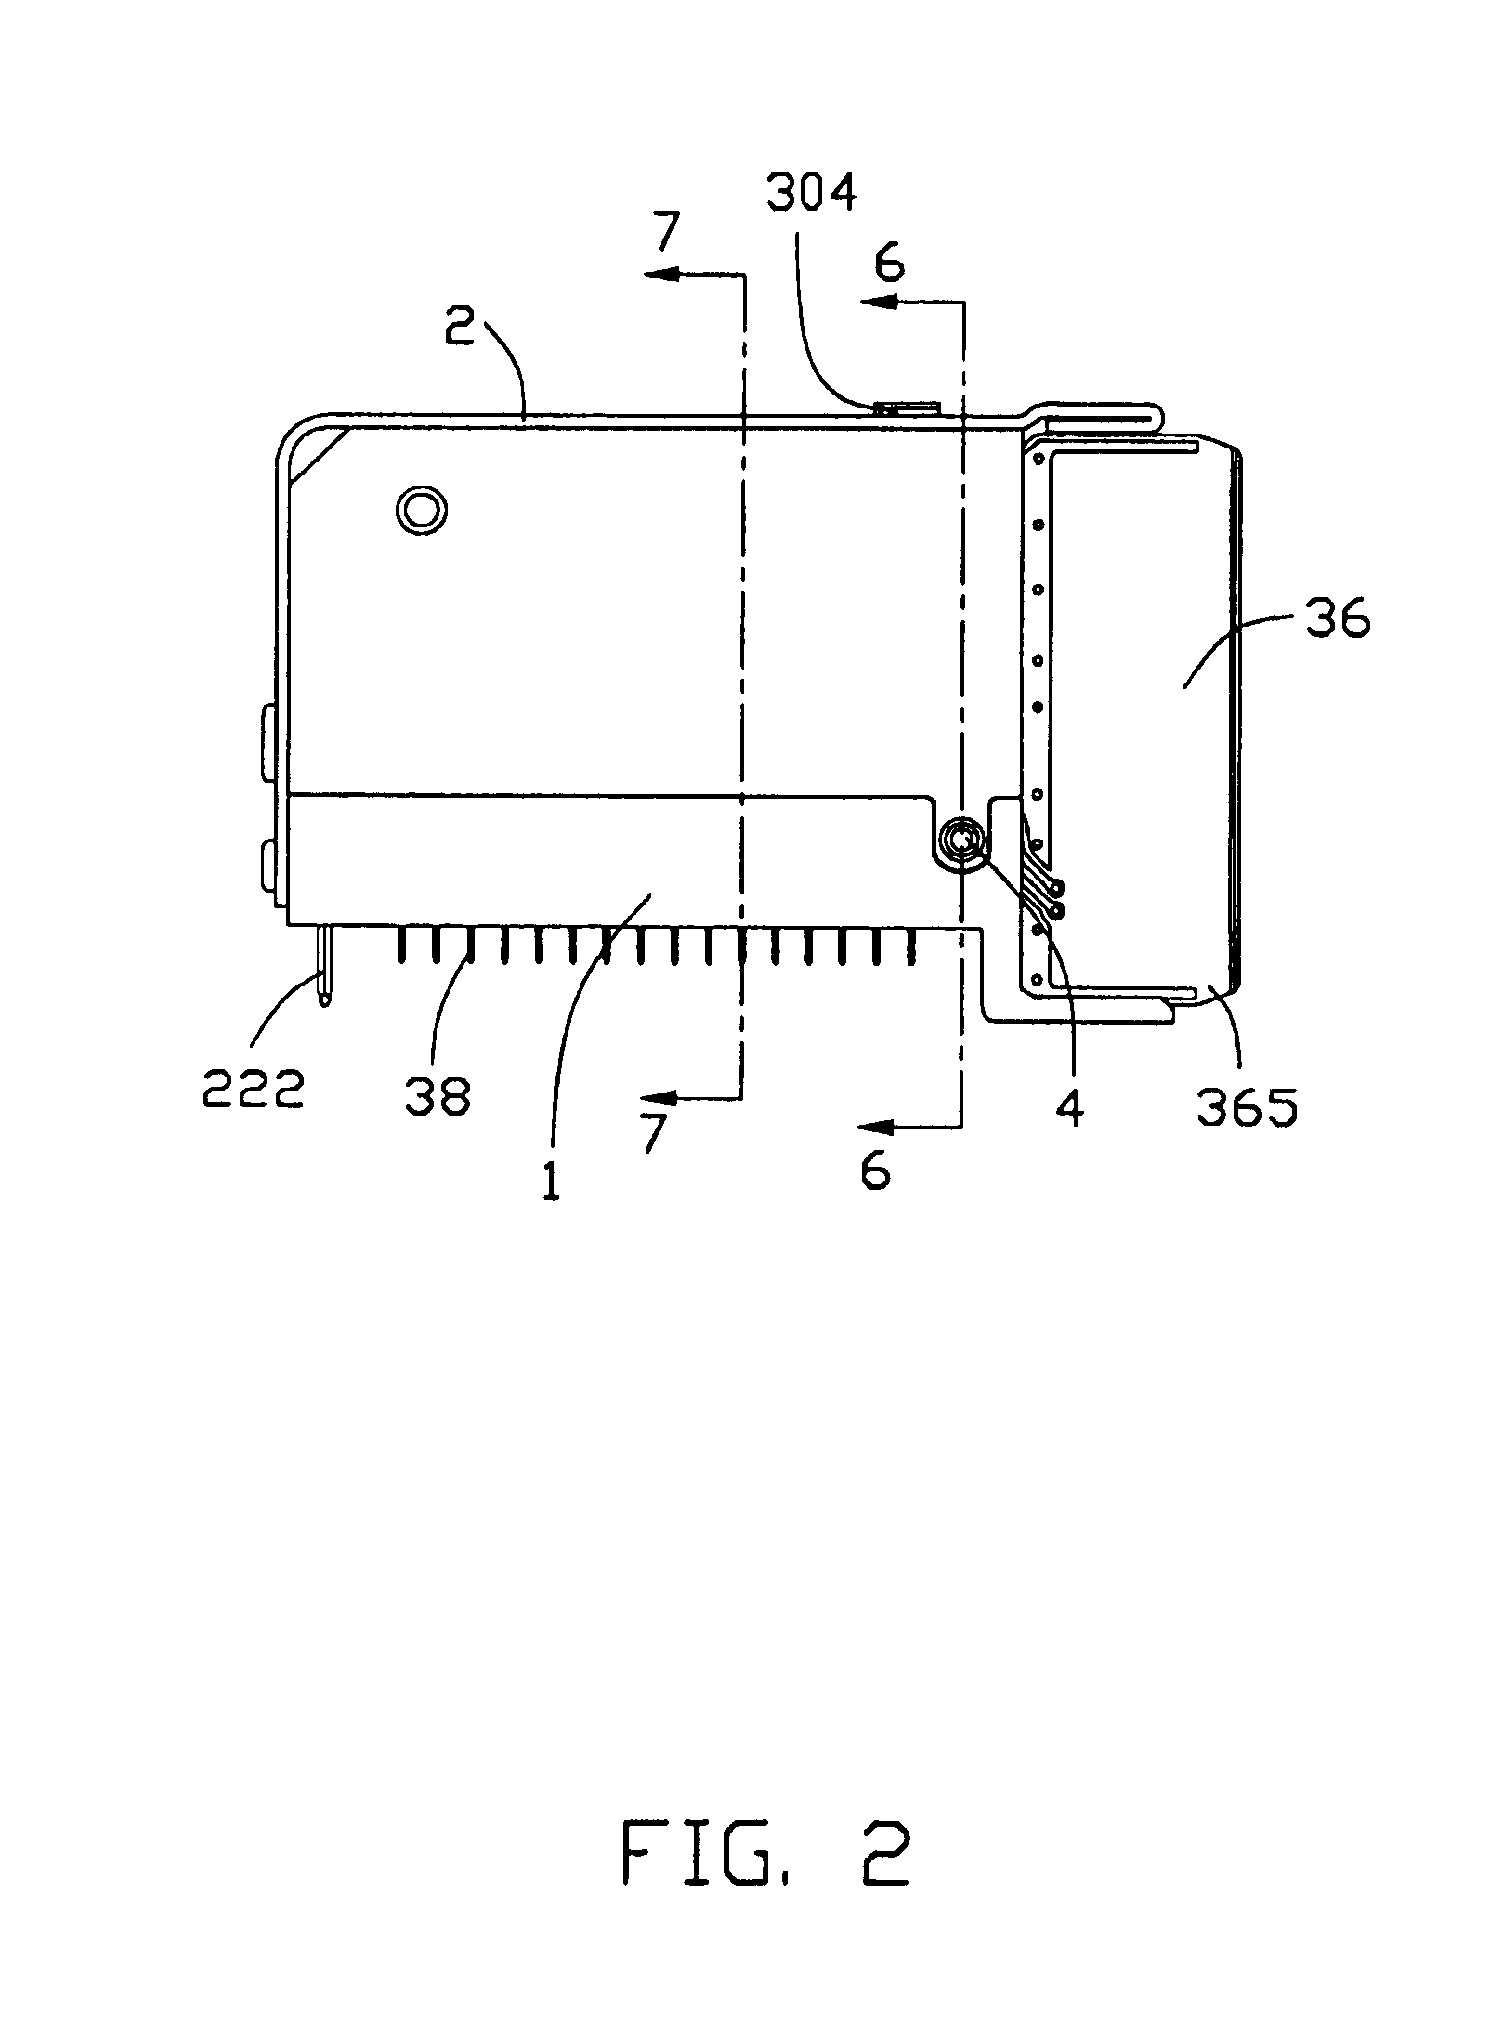 Electrical connector with circuit board module